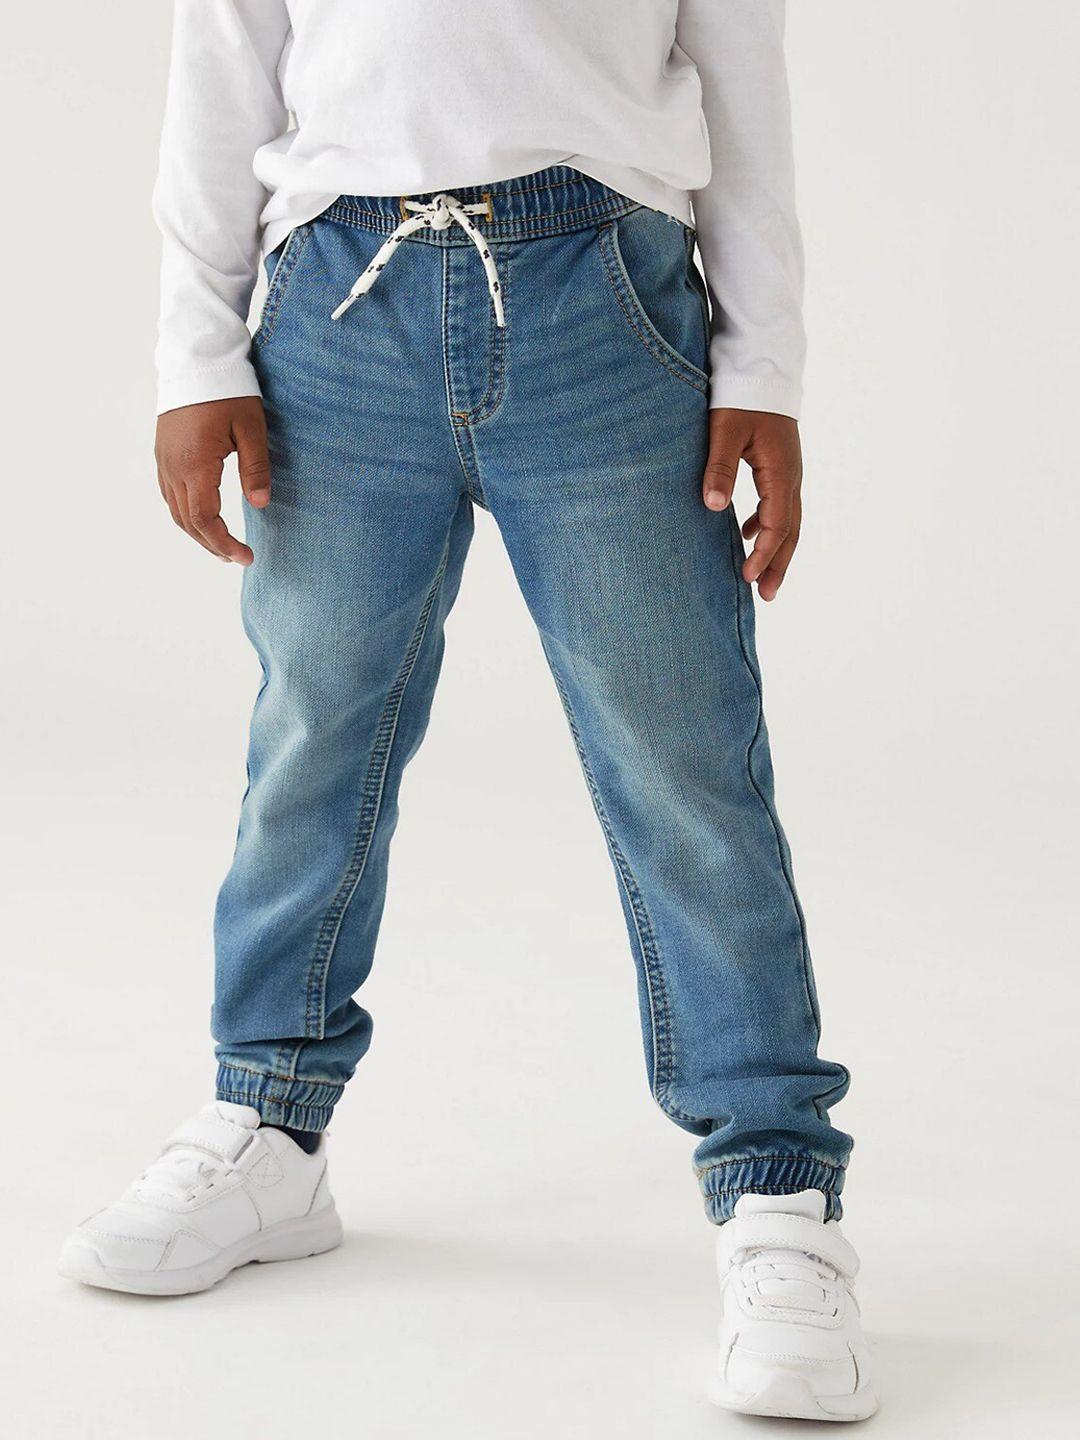 marks-&-spencer-boys-blue-cotton-high-rise-light-fade-jeans